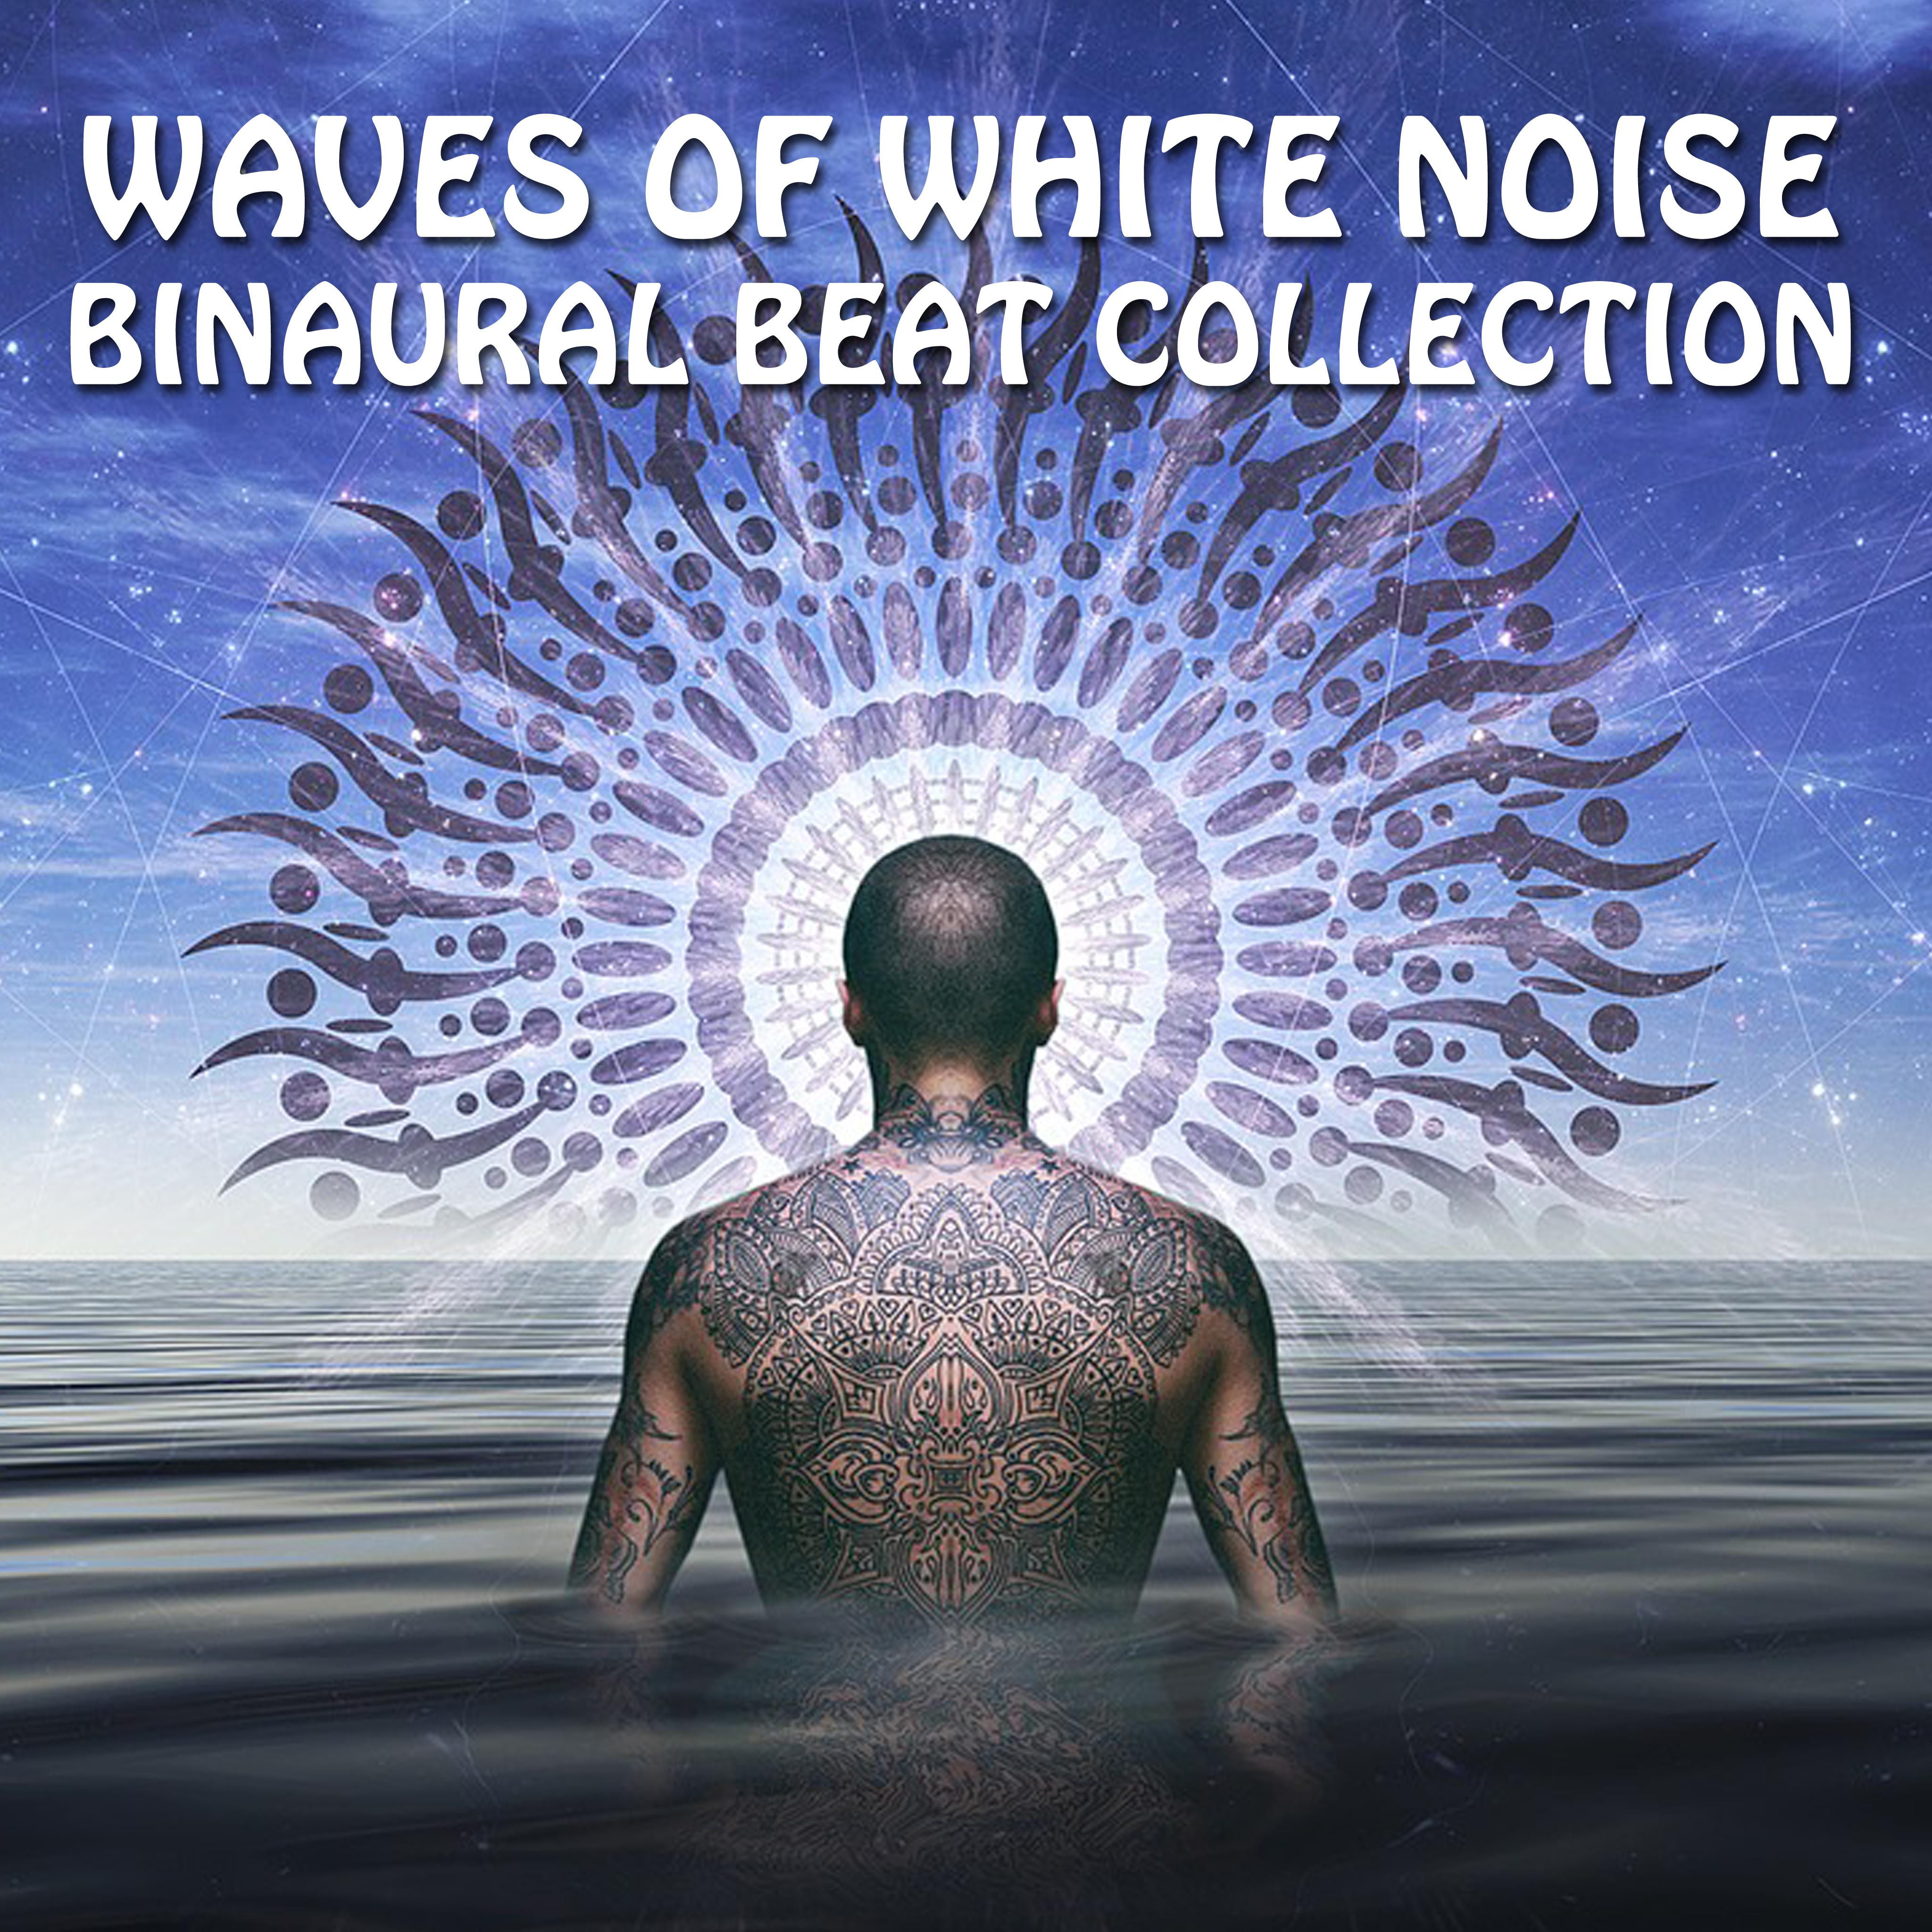 12 Waves of White Noise: Binaural Beat Collection